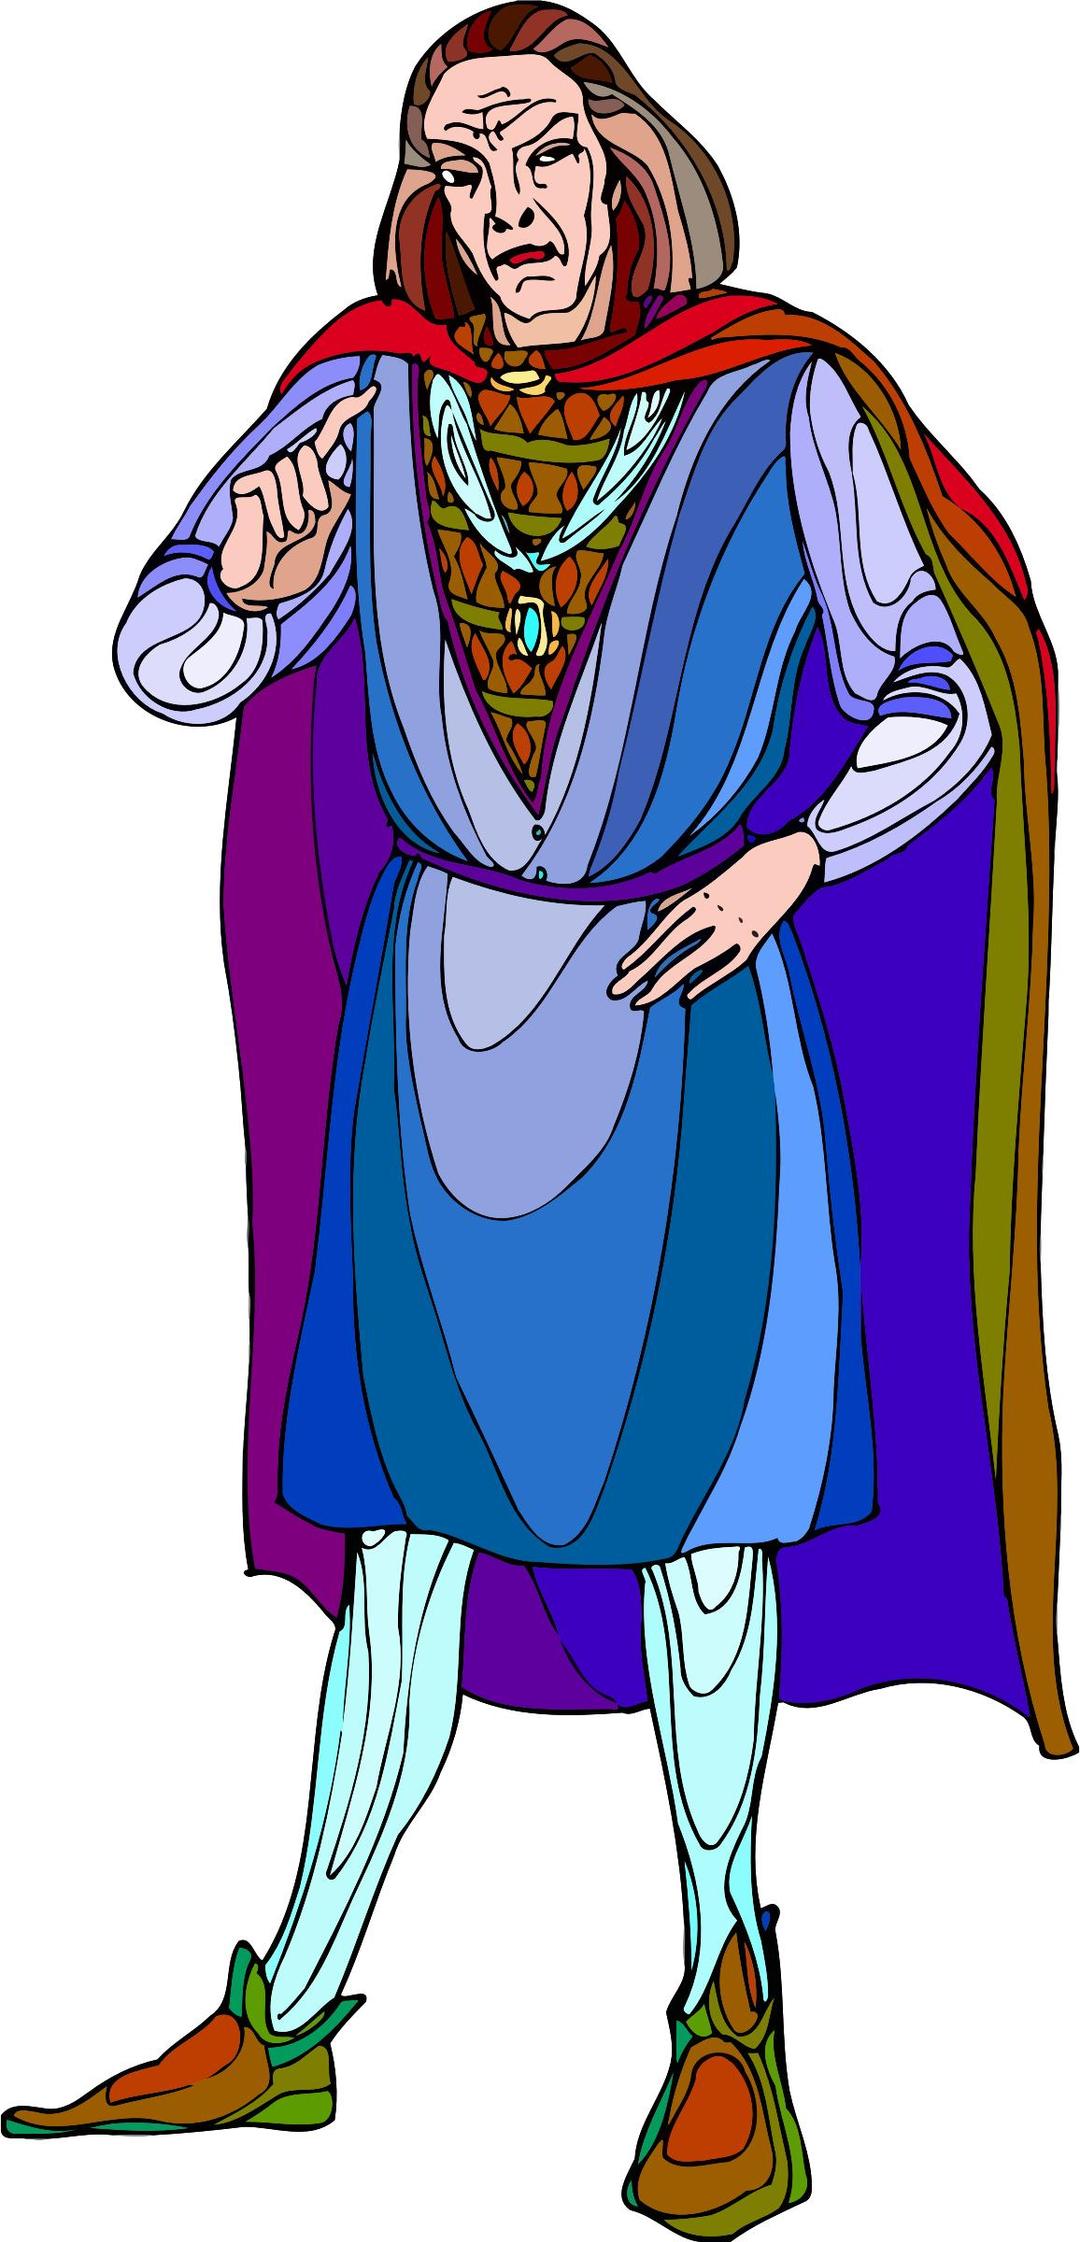 Shakespeare characters - Capulet (colour) png transparent